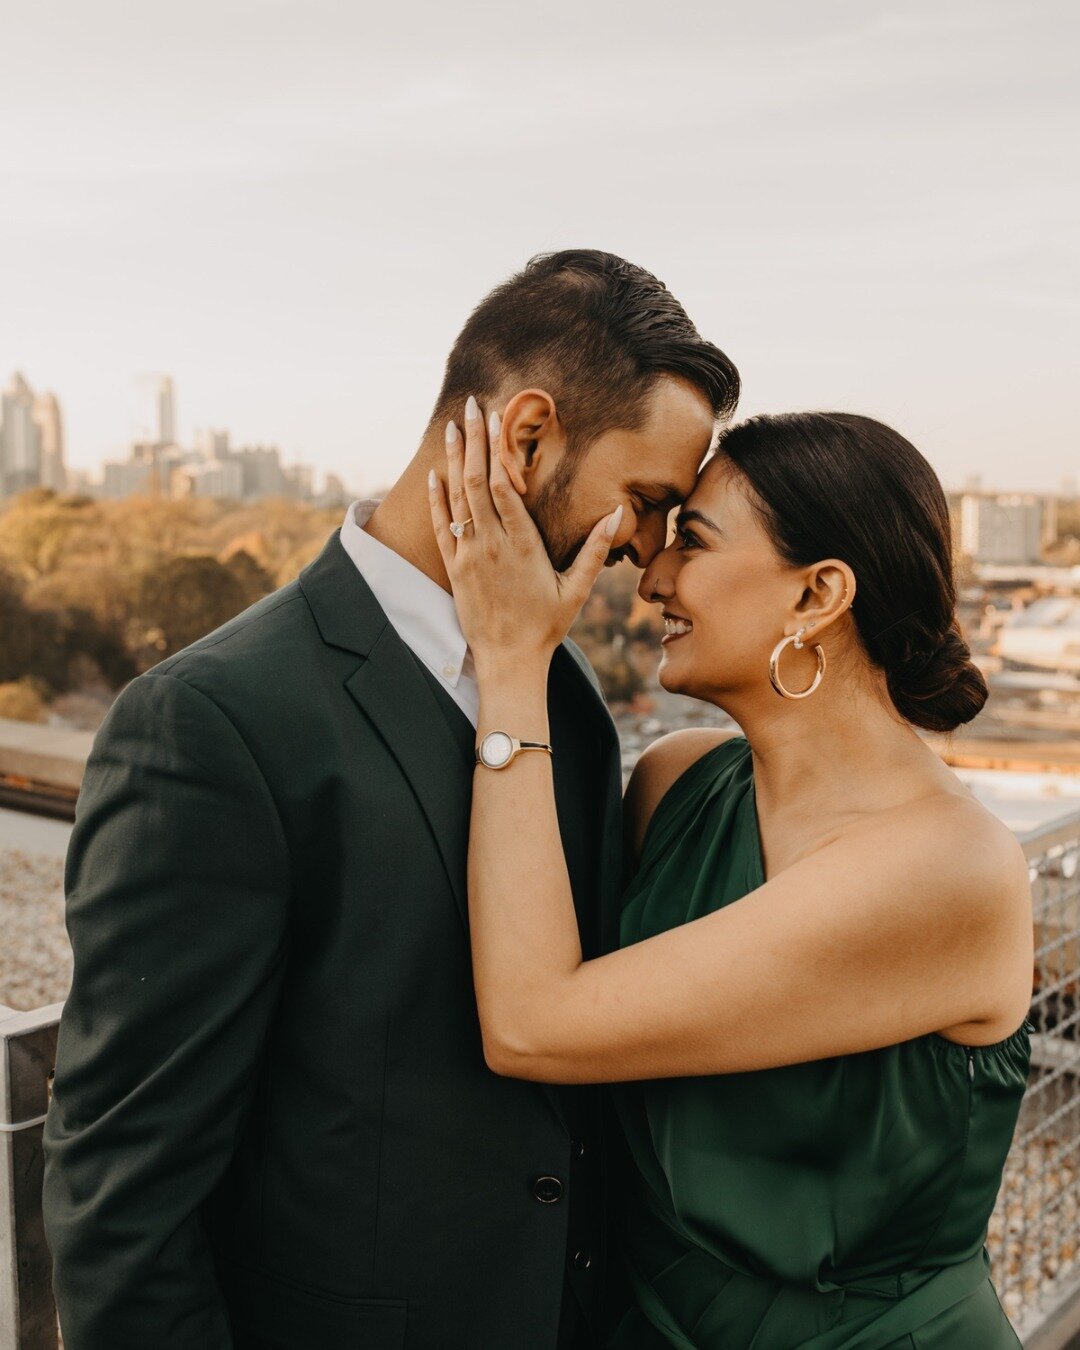 Join the ranks of our happy couples and pop the question on The Roof, with stunning views as your witness. Let us help you plan the perfect proposal with personalized touches that will make your special moment unforgettable! Link in bio to connect wi